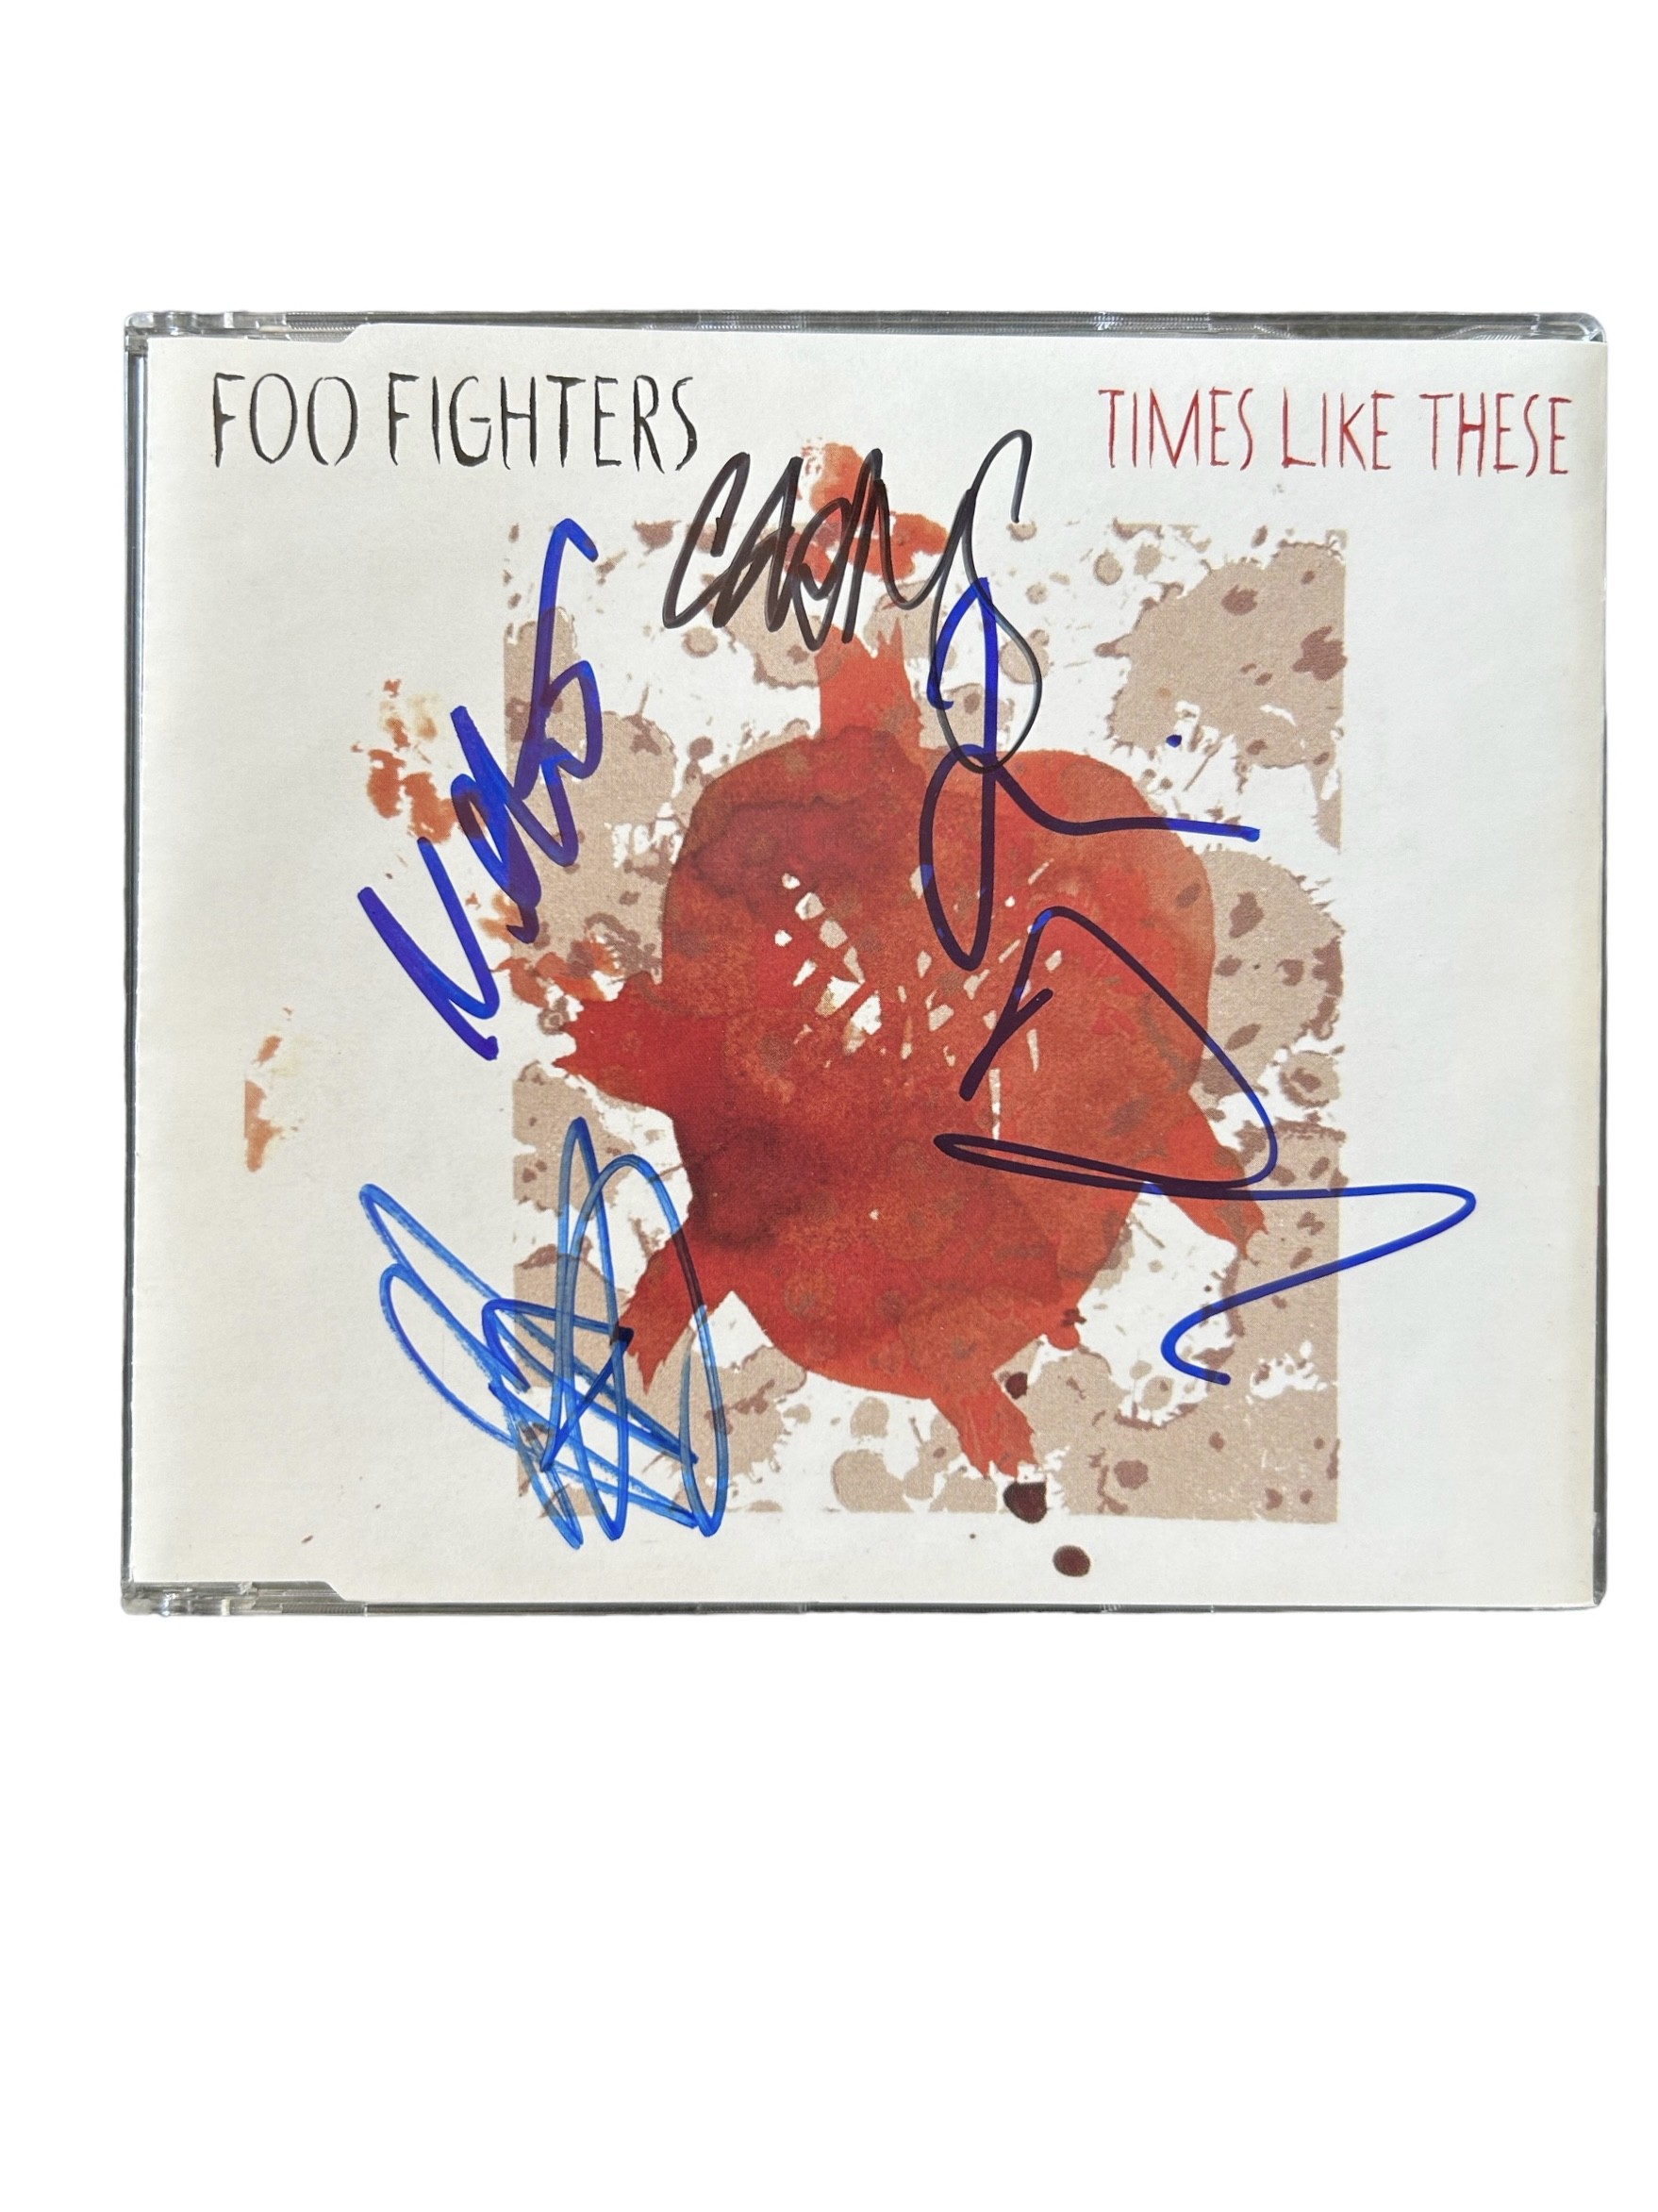 Times Like These, Foo Fighters